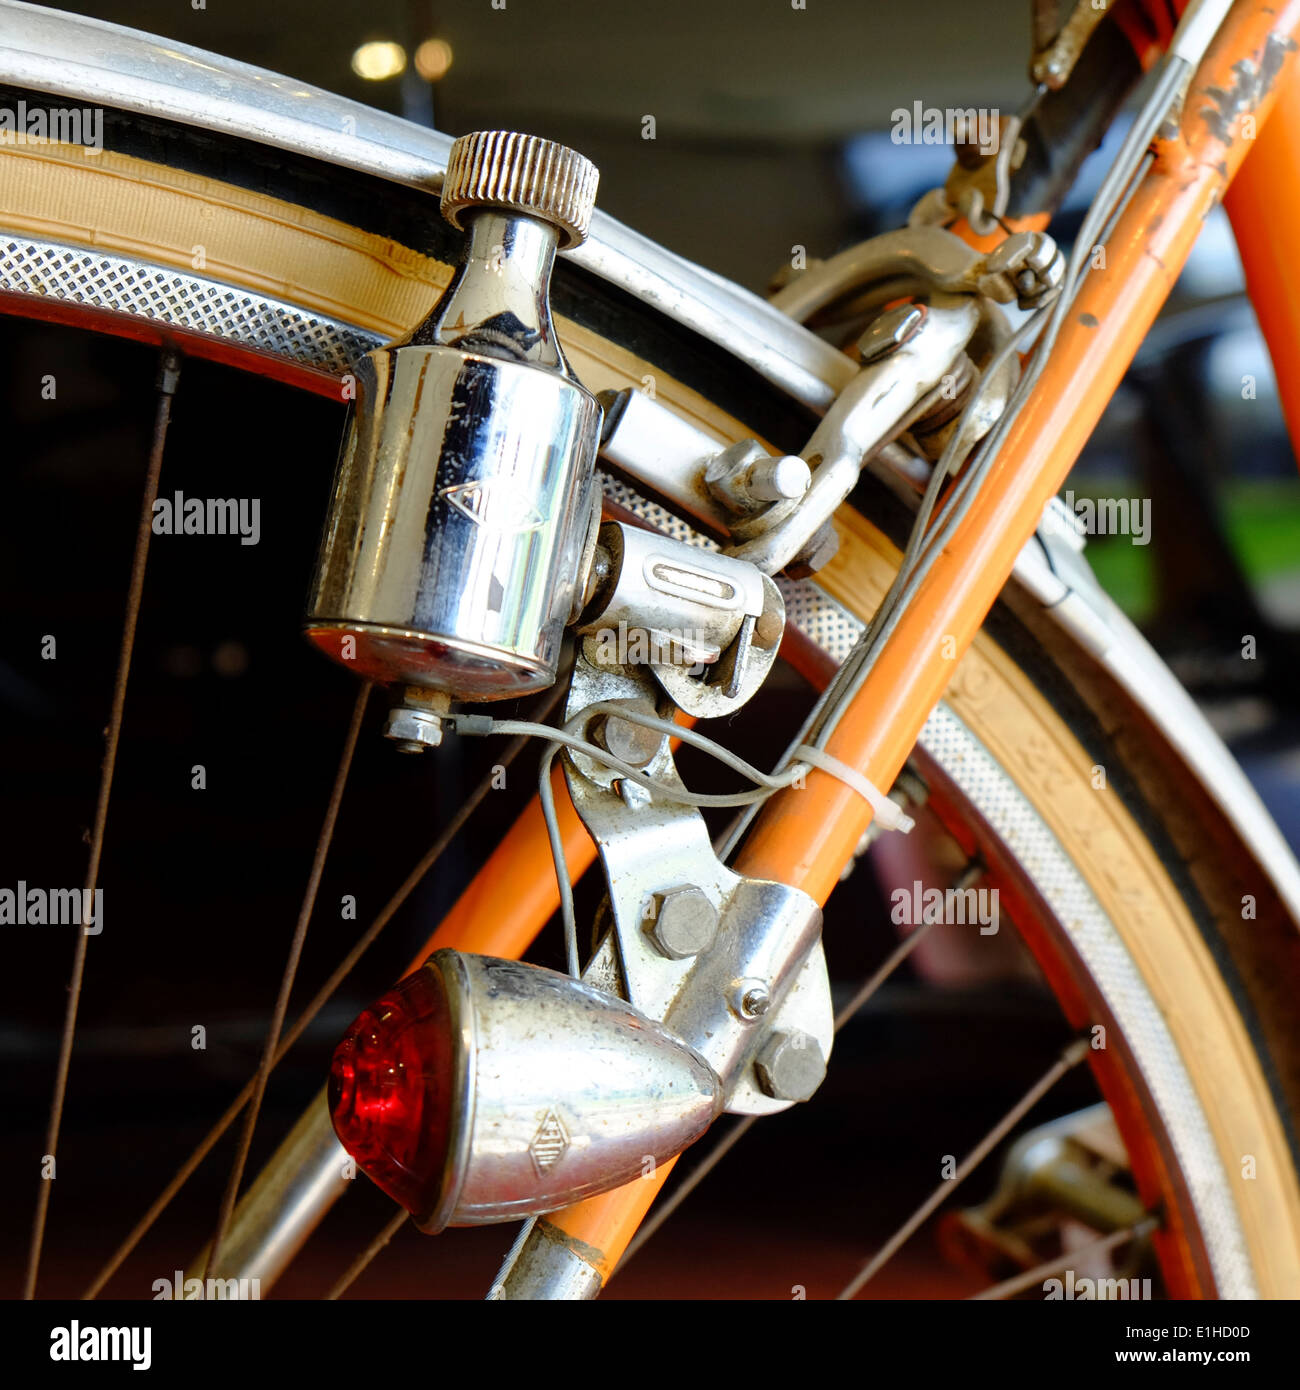 Vintage racing bicycle Dynamo and tail lamp Stock Photo